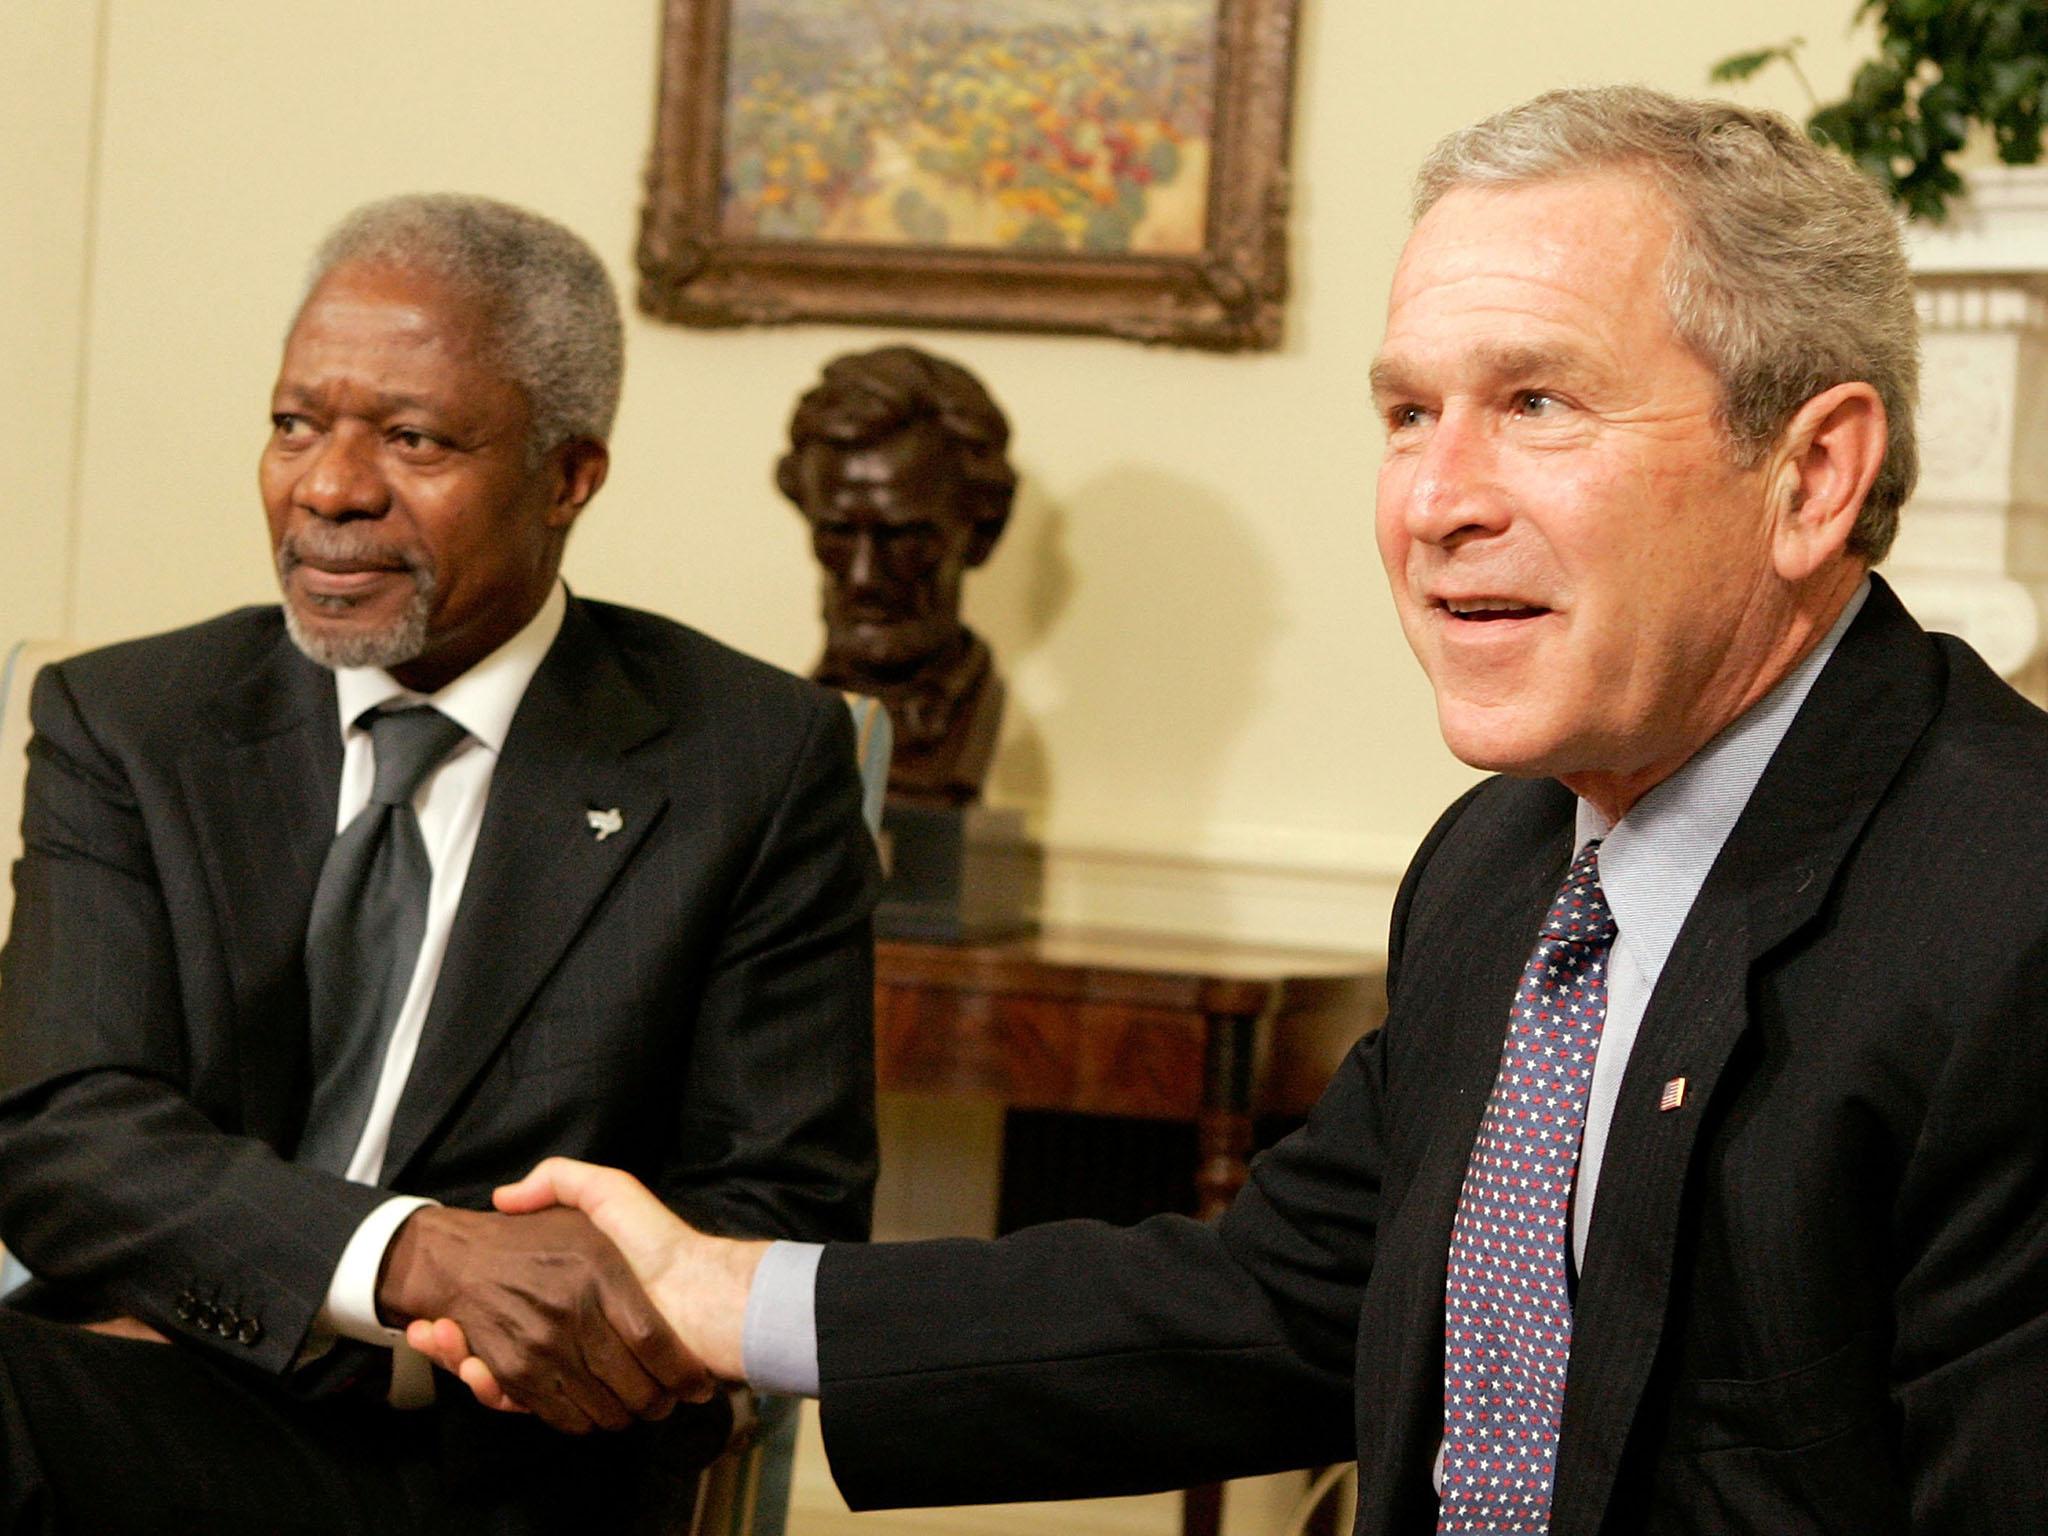 Annan agreed to work together with George W Bush to help alleviate the suffering in Sudan in 2006